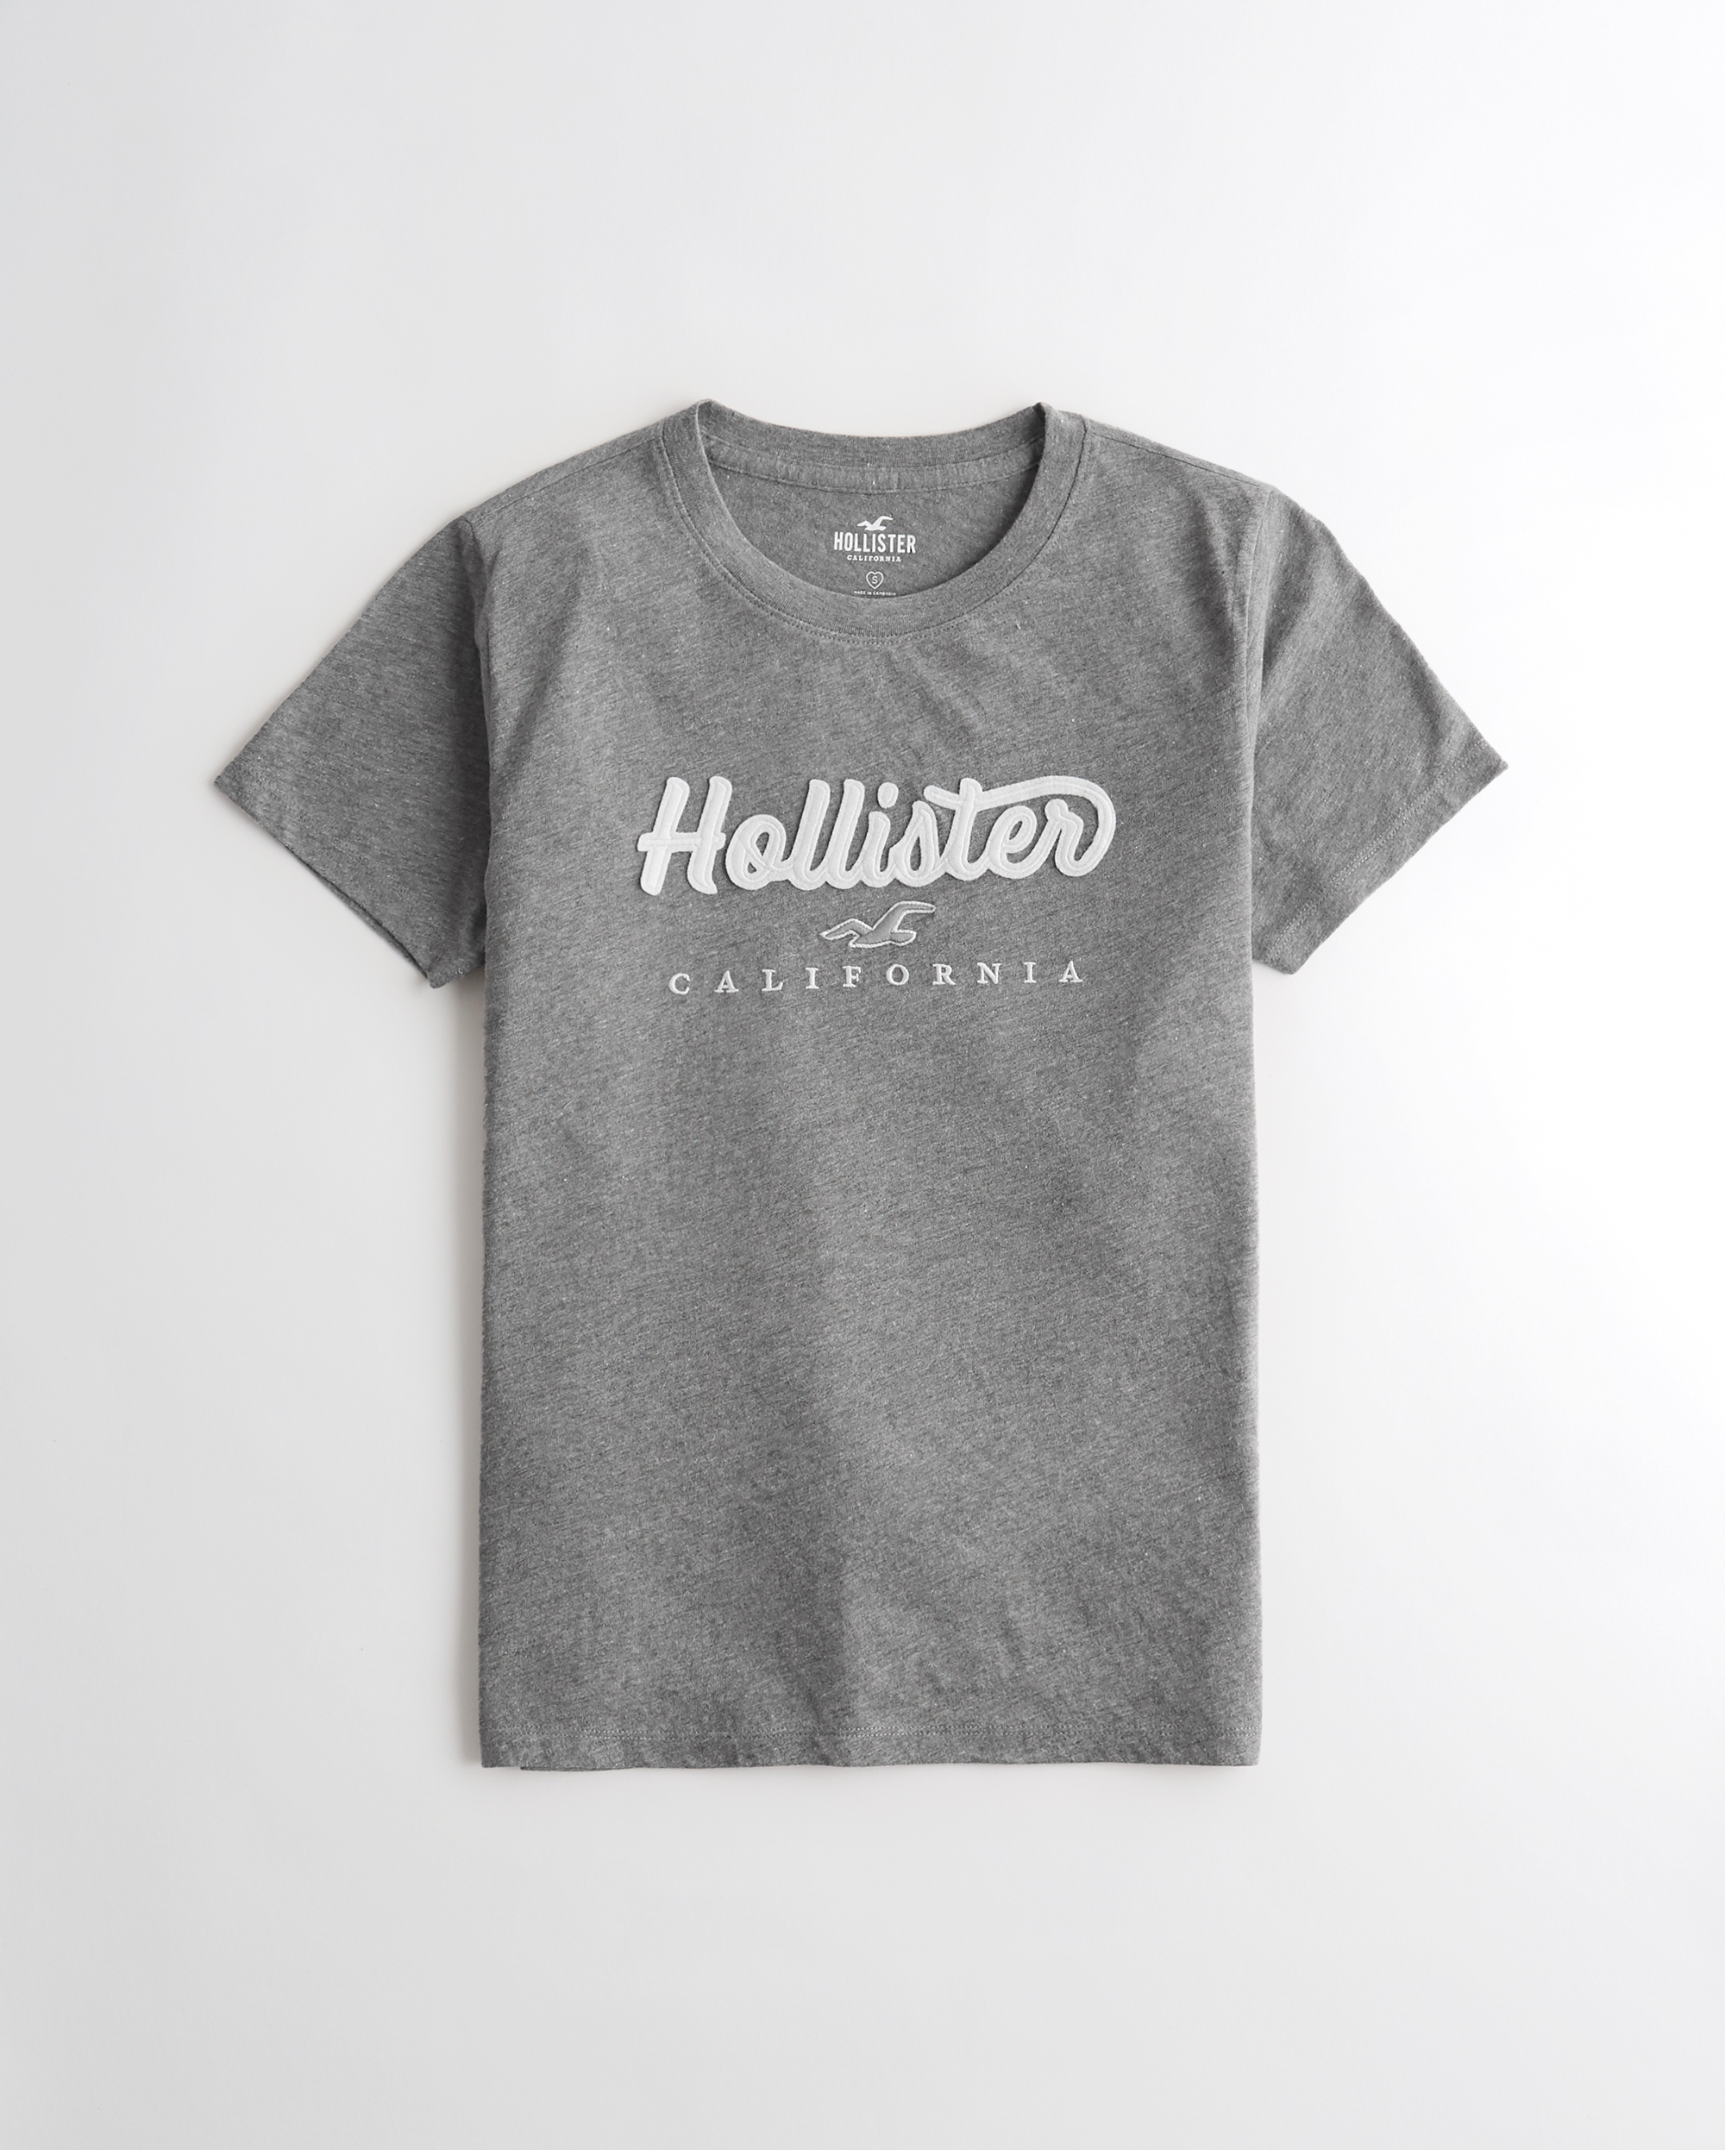 Girls Graphic Tees | Hollister Co.